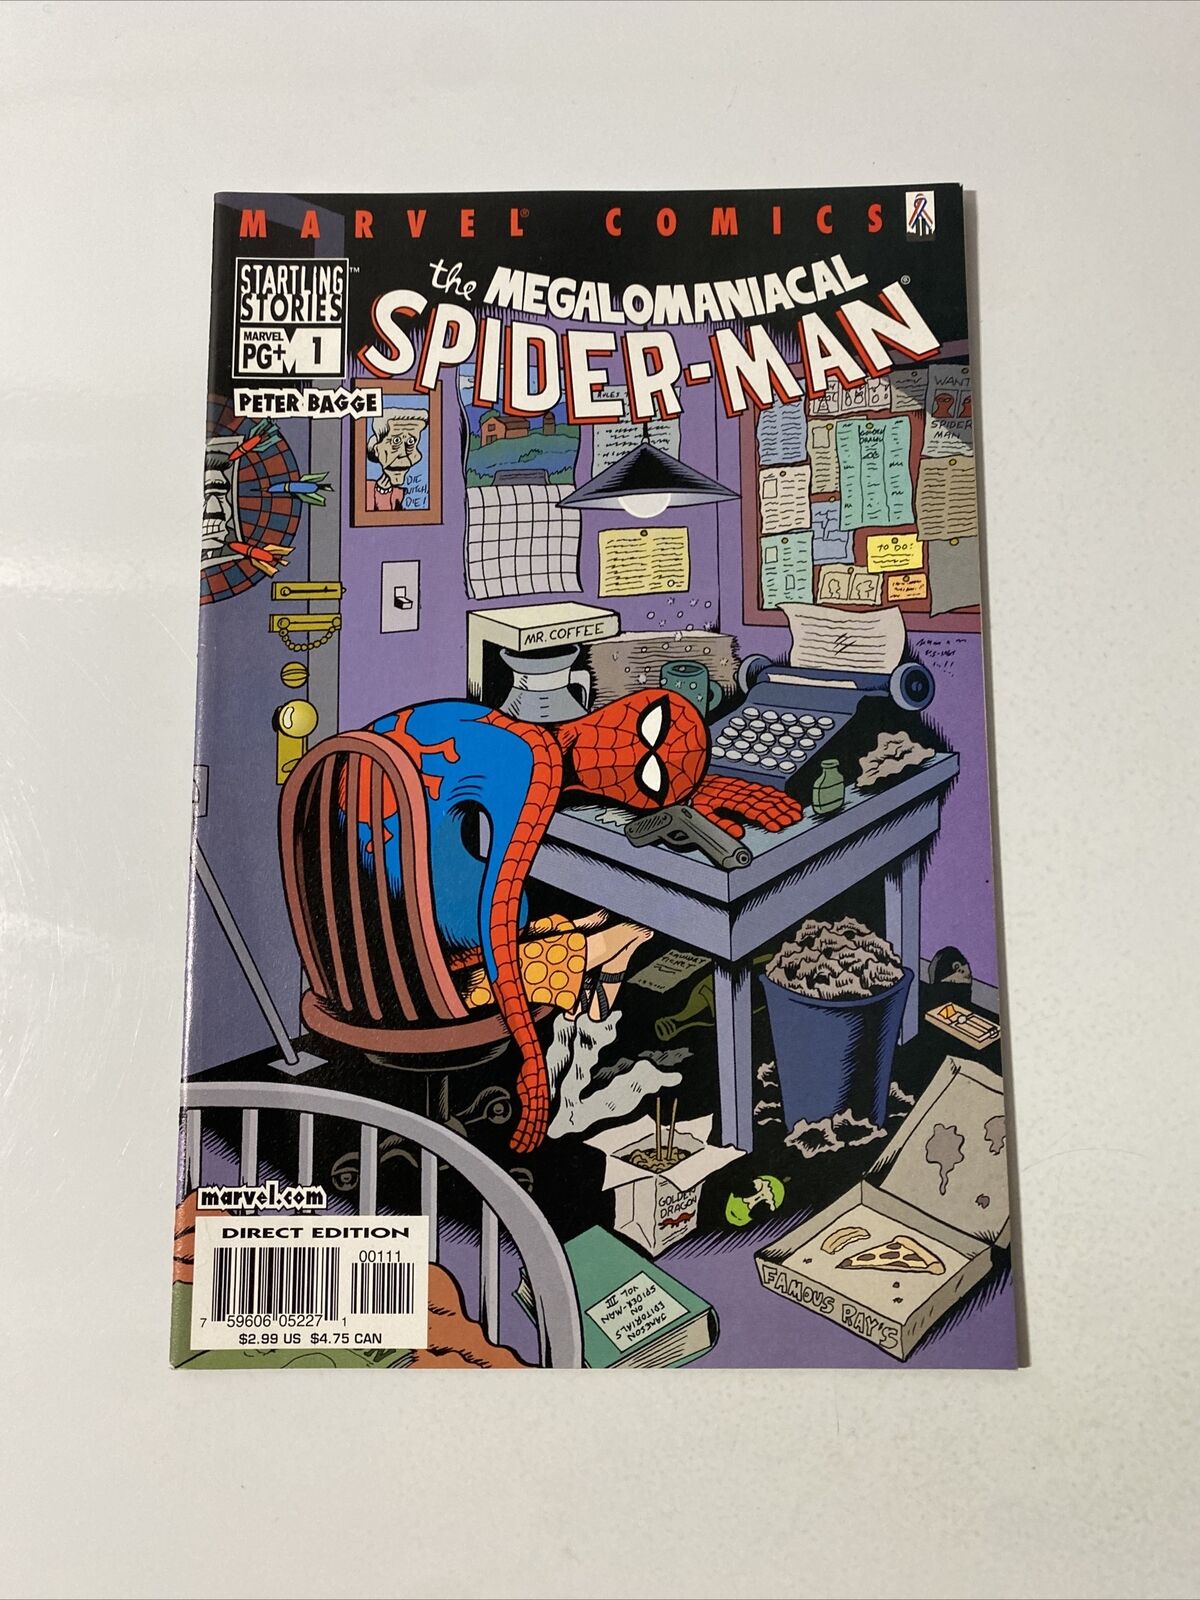 The Megalomaniacal Spider-Man #1 Marvel Comics 2002 Peter Bagge High Grade